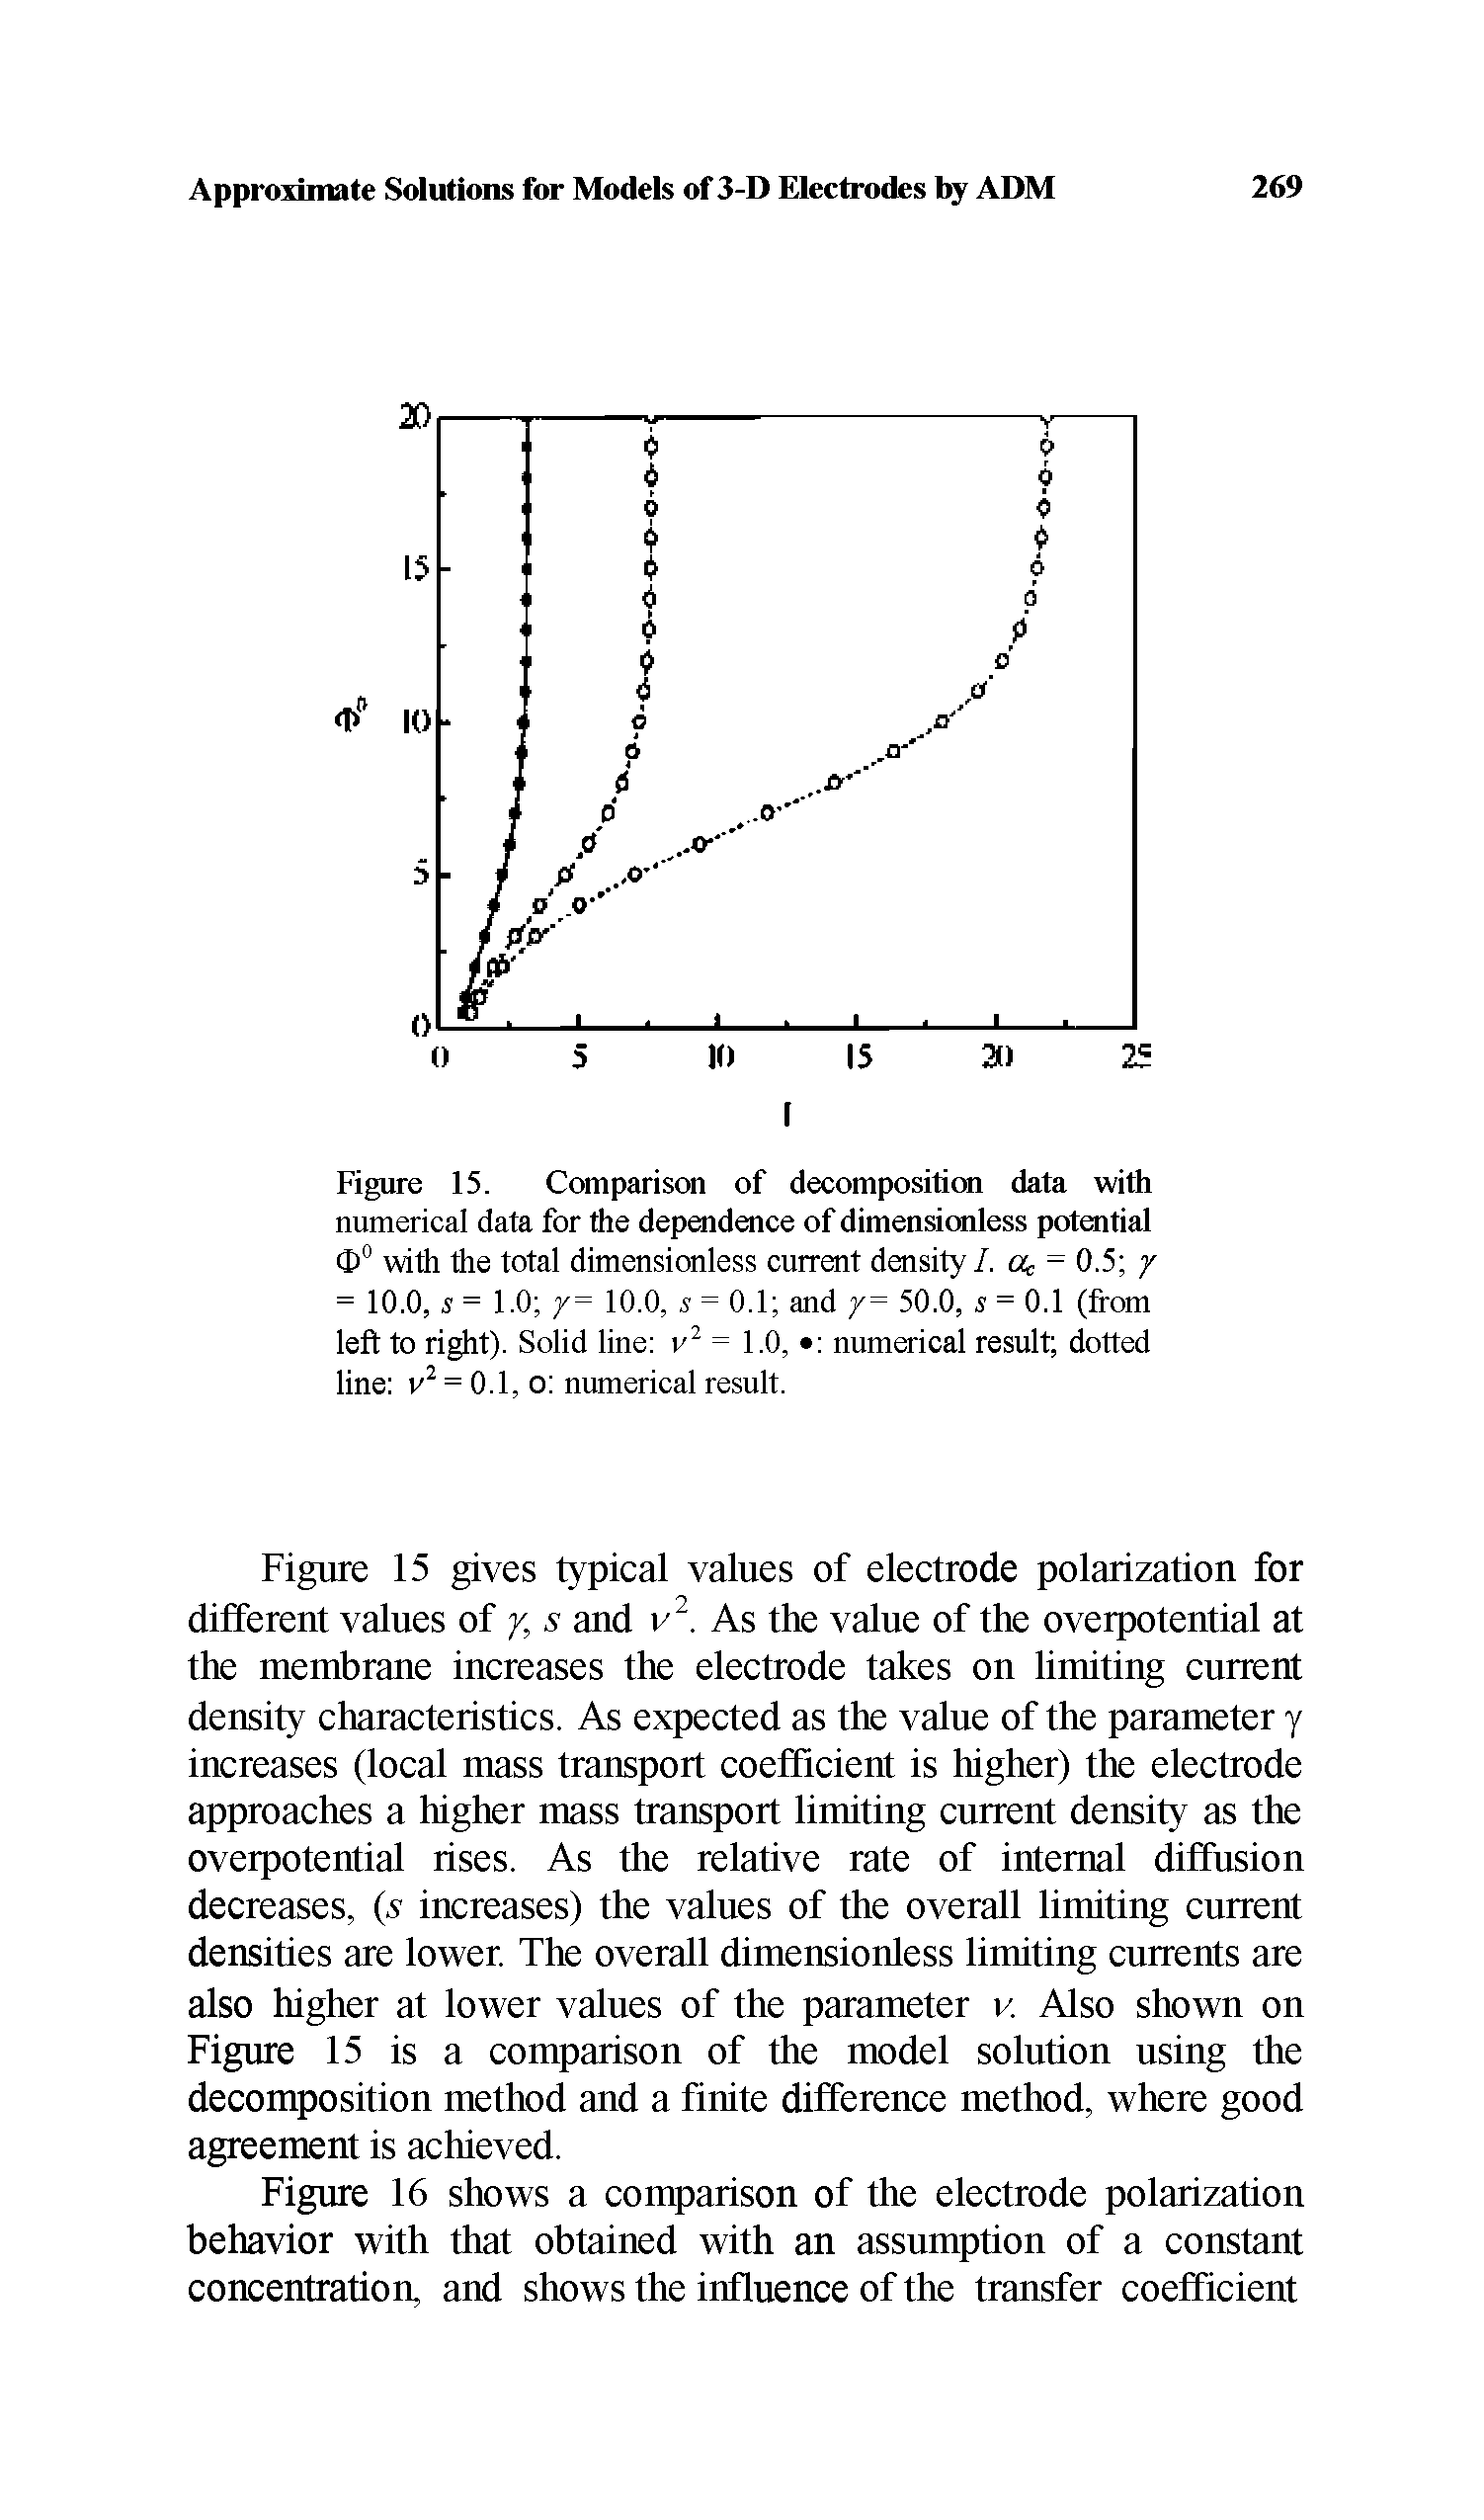 Figure 15. Comparison of decomposition data with numerical data for the dependence of dimensionless potential O0 with the total dimensionless current density/, ok = 0.5 y = 10.0, s = 1.0 y= 10.0, s = 0.1 and y= 50.0, s = 0.1 (from left to right). Solid line v2 = 1.0, numerical result dotted line v2 = 0.1, o numerical result.